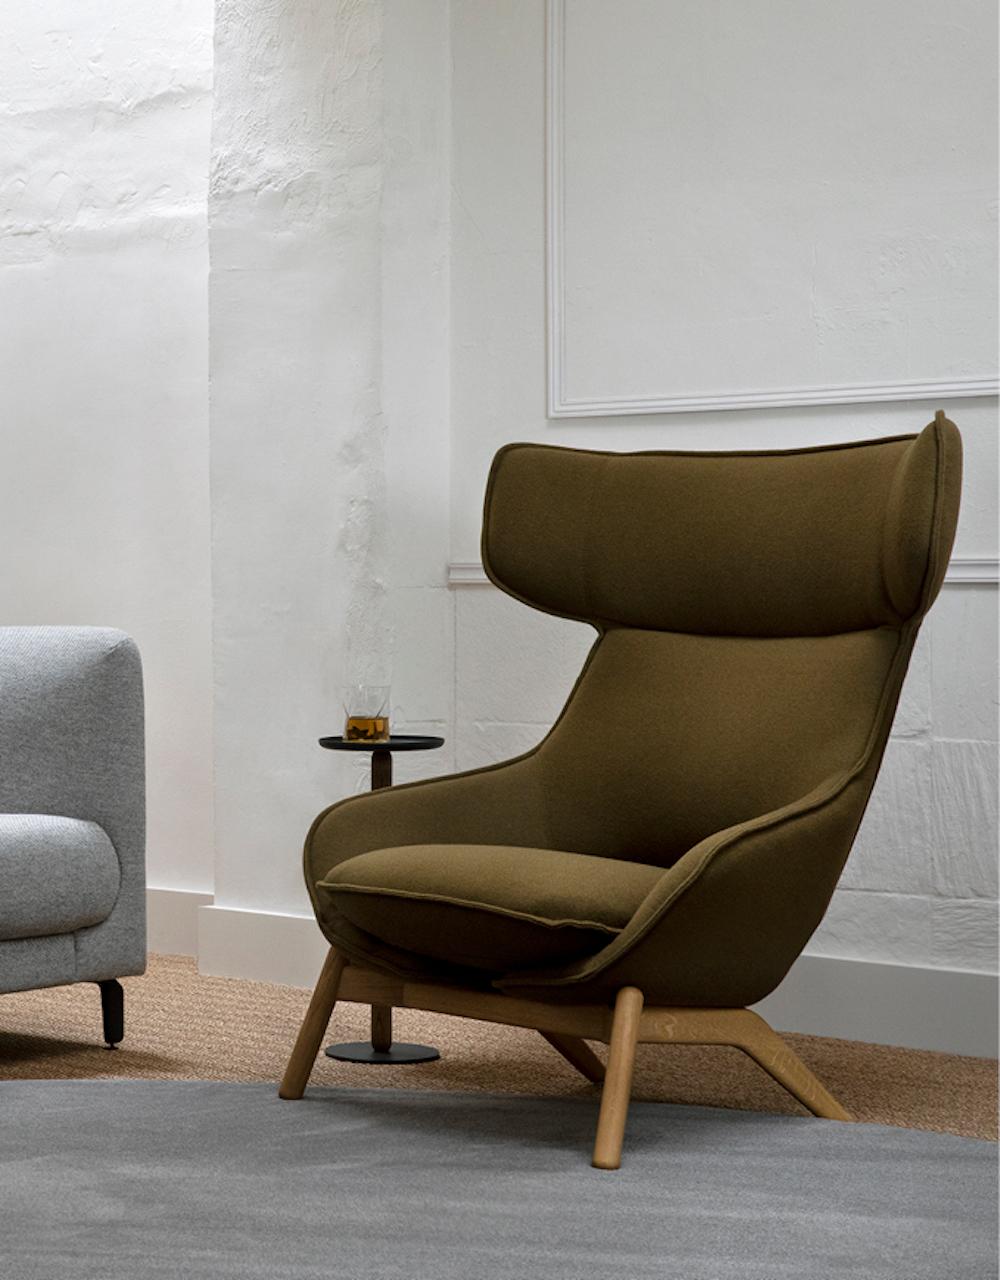 Kalm is Artifort’s large, new cosy armchair by our French designer Patrick Norguet. It is a sanctuary in its own right, a place to unwind and get comfortable. With Kalm, Patrick Norguet has created an iconic, luxurious and comfortable high-back